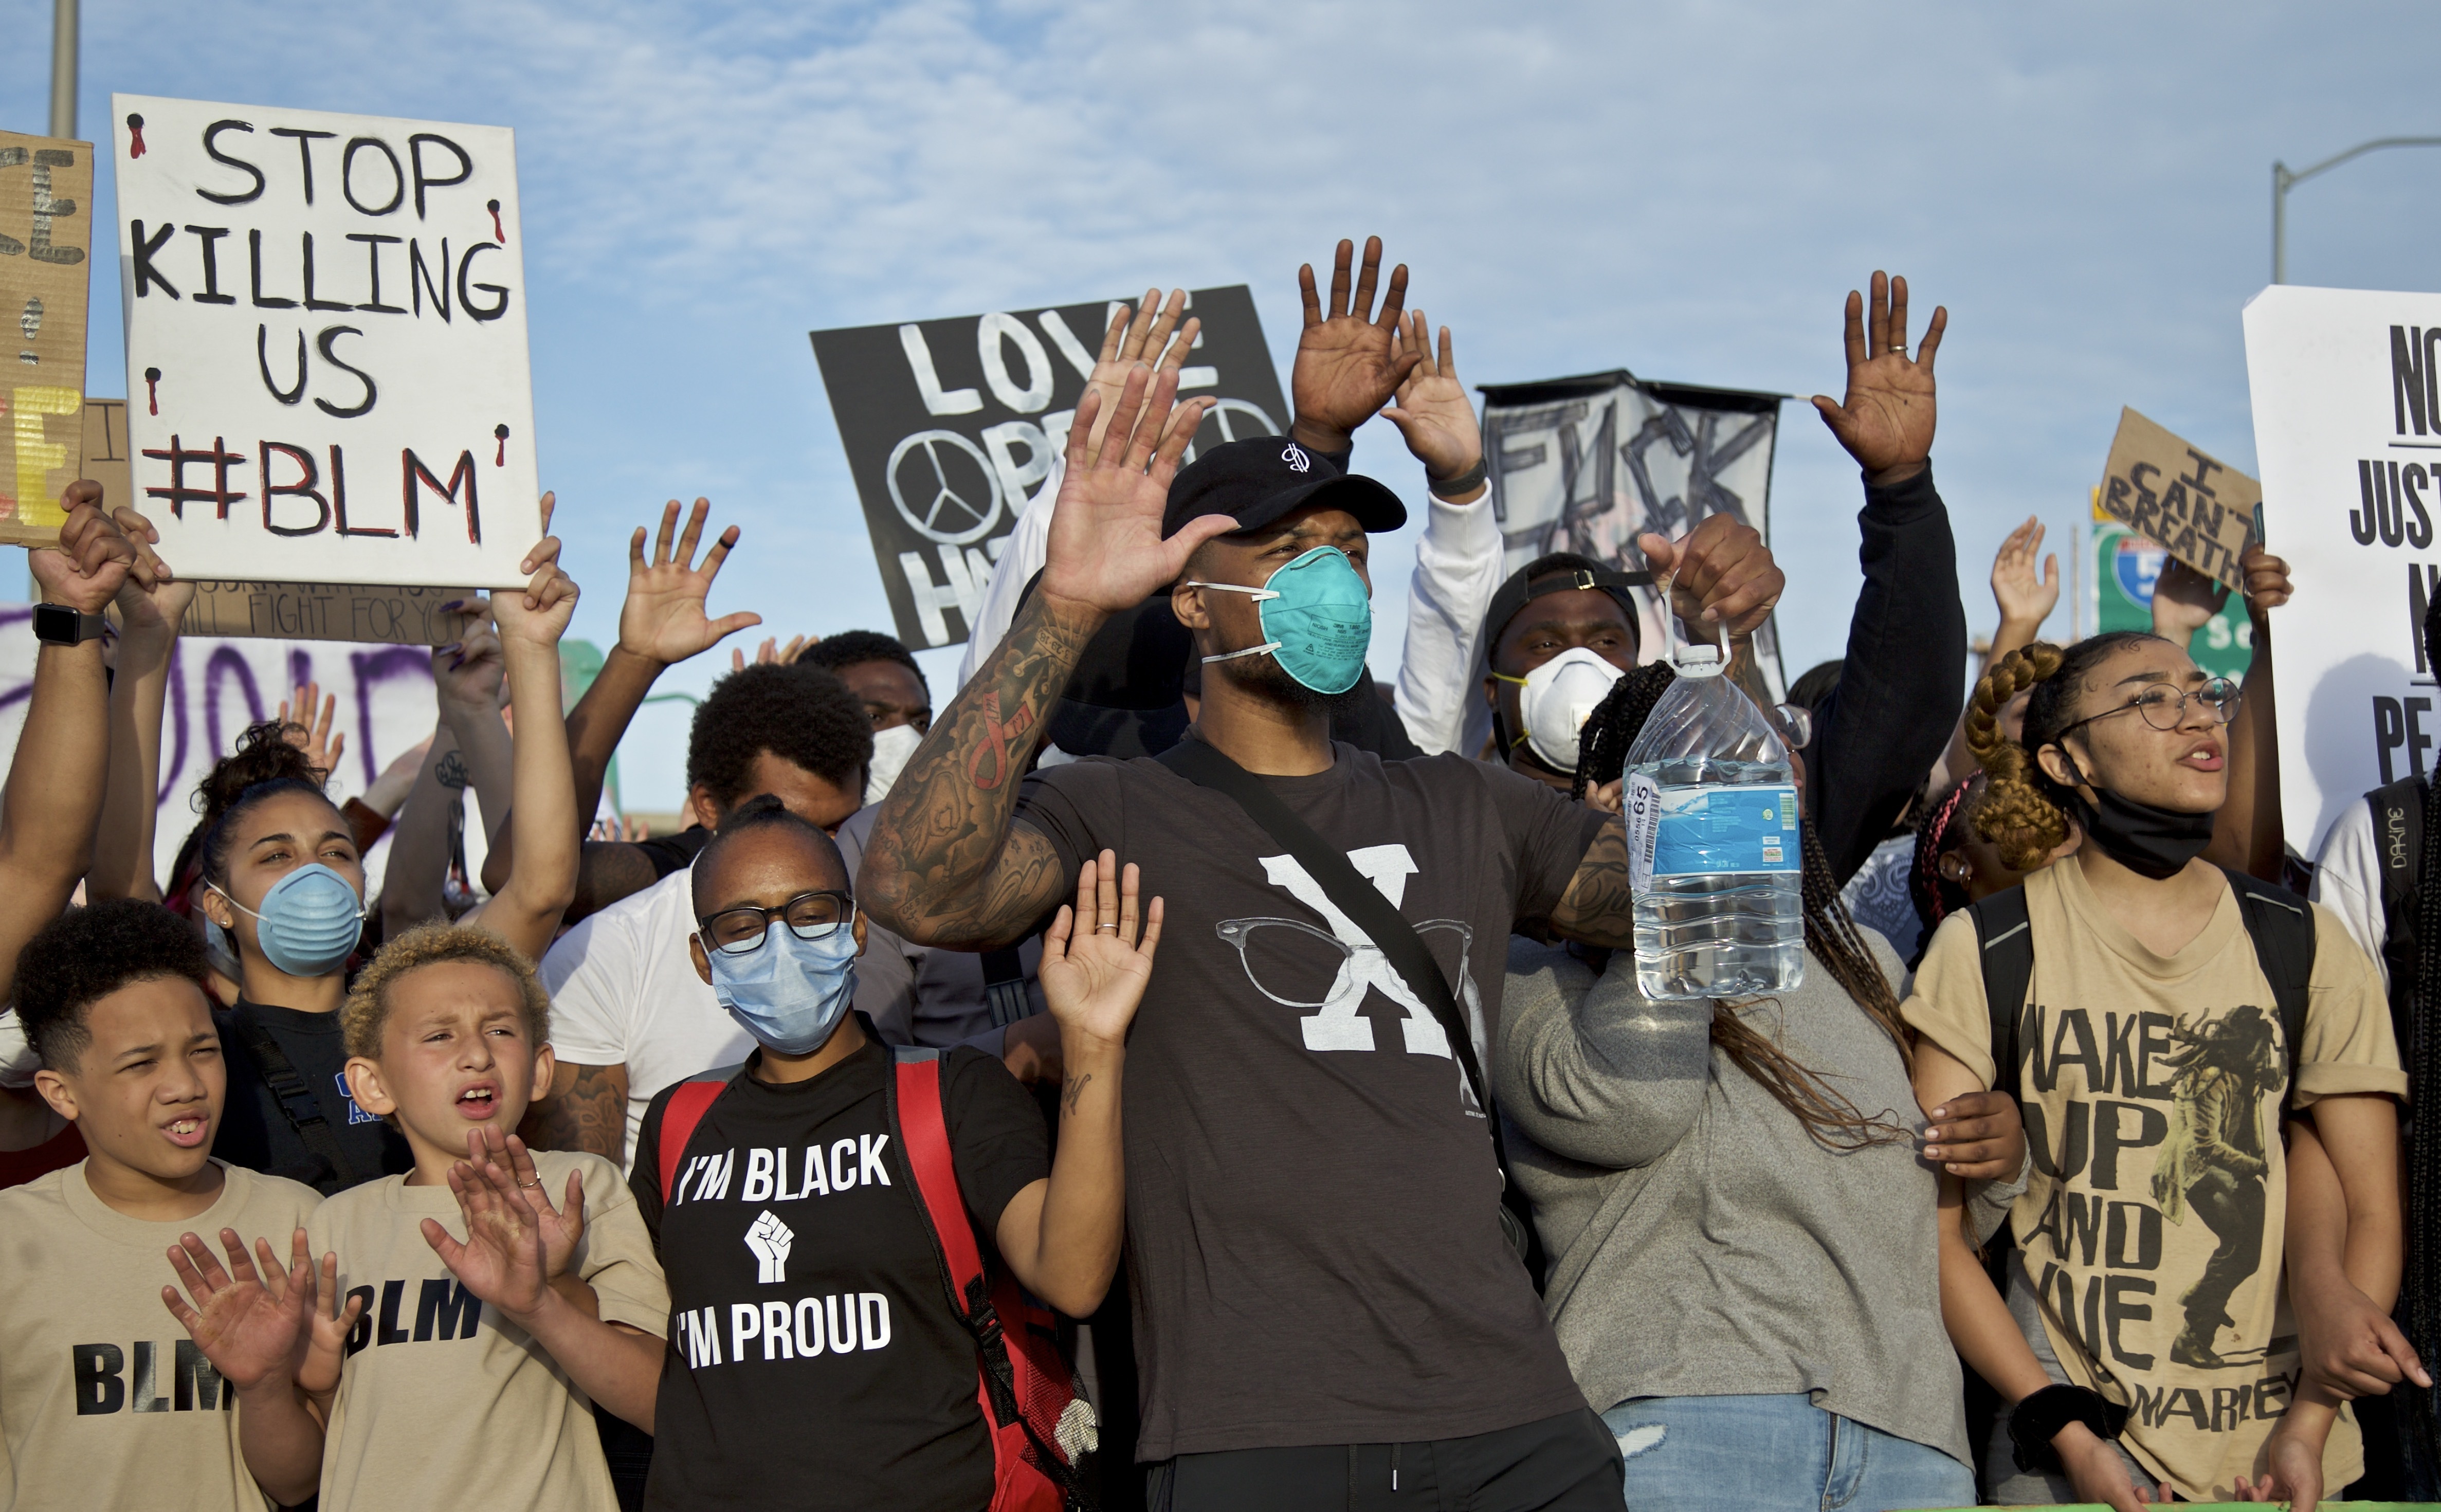 Portland Trail Blazers' Damian Lillard, center, joins other demonstrators in Portland, Ore., during a protest against police brutality and racism, sparked by the death of George Floyd, who died May 25 after being restrained by police in Minneapolis. (AP Photo/Craig Mitchelldyer)